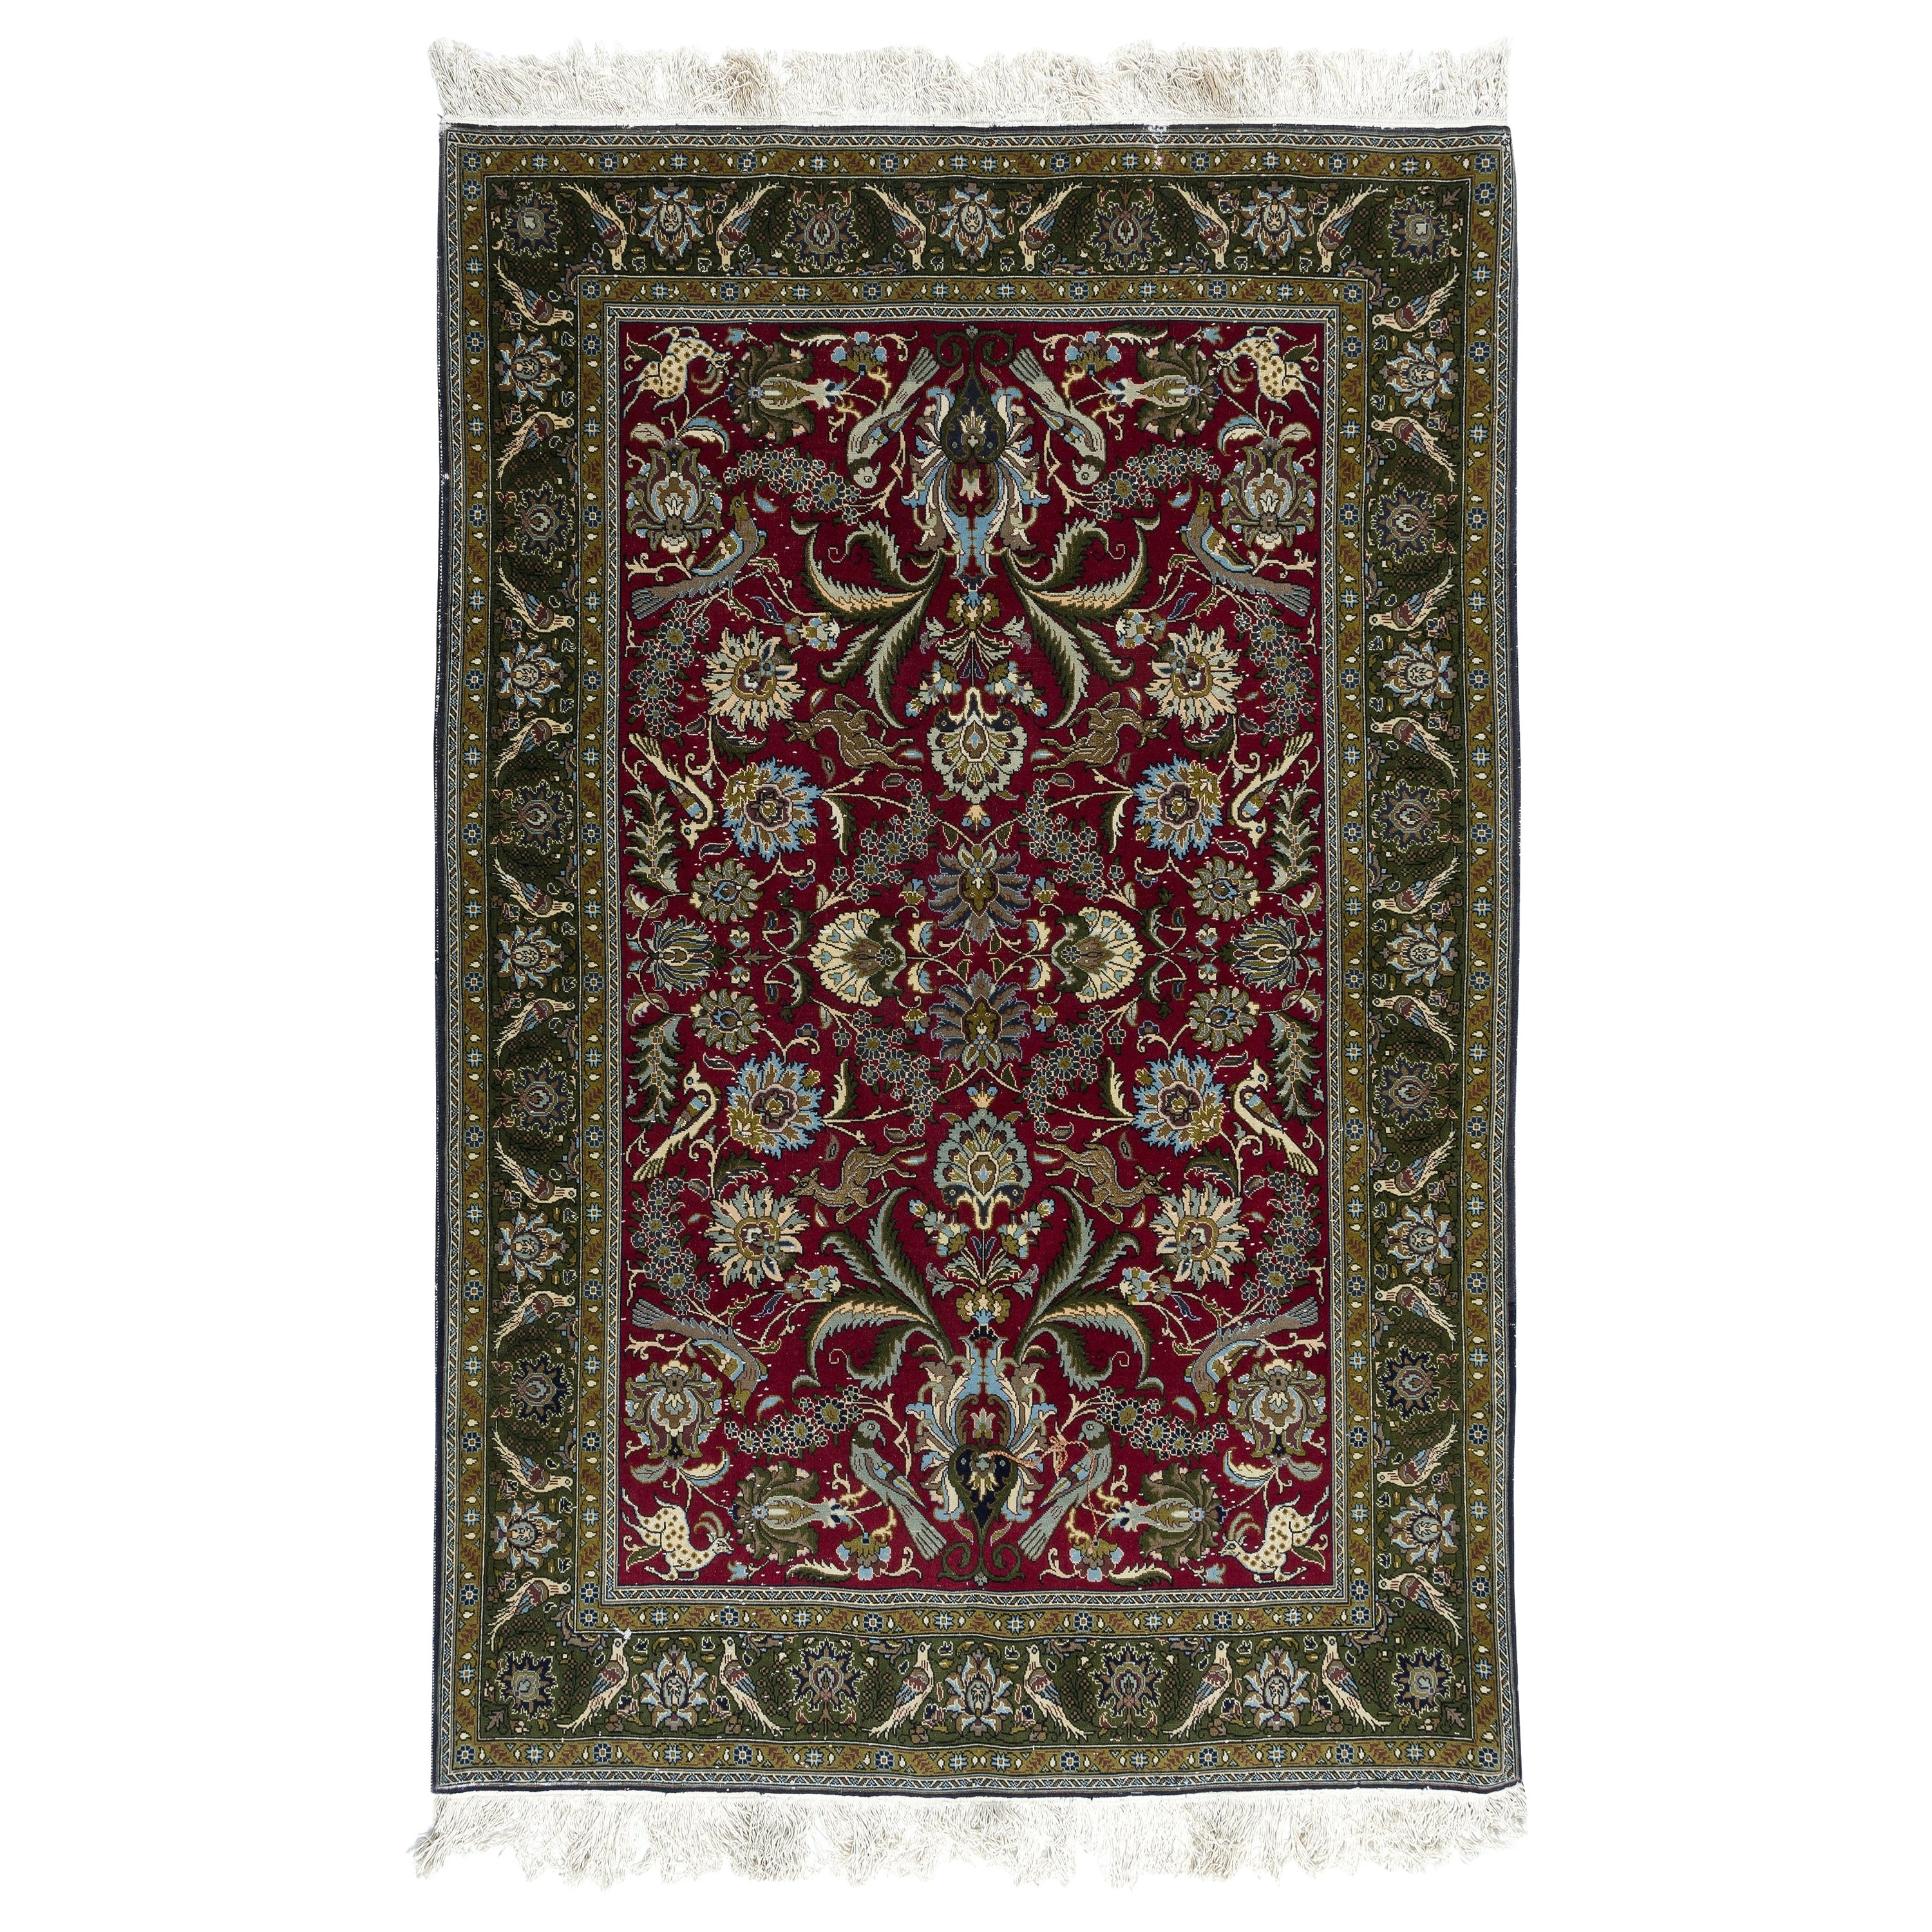 4.6x7 Ft Hand Knotted Turkish Rug in Red & Green with Floral Botanical Design